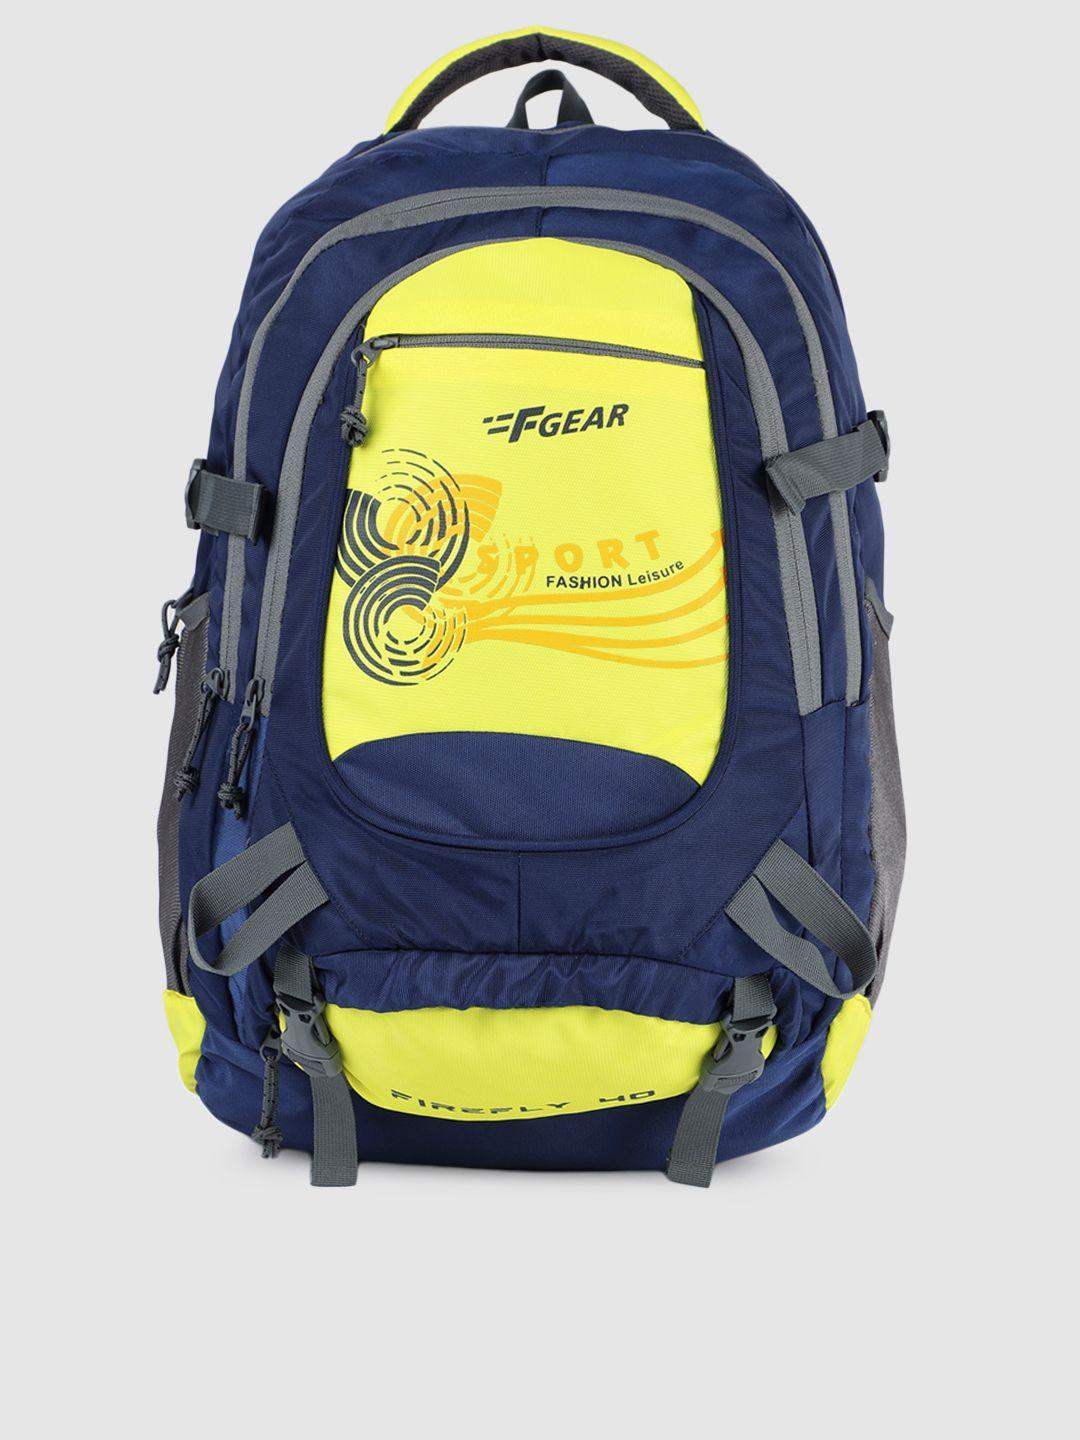 f gear unisex navy blue & yellow graphic backpack